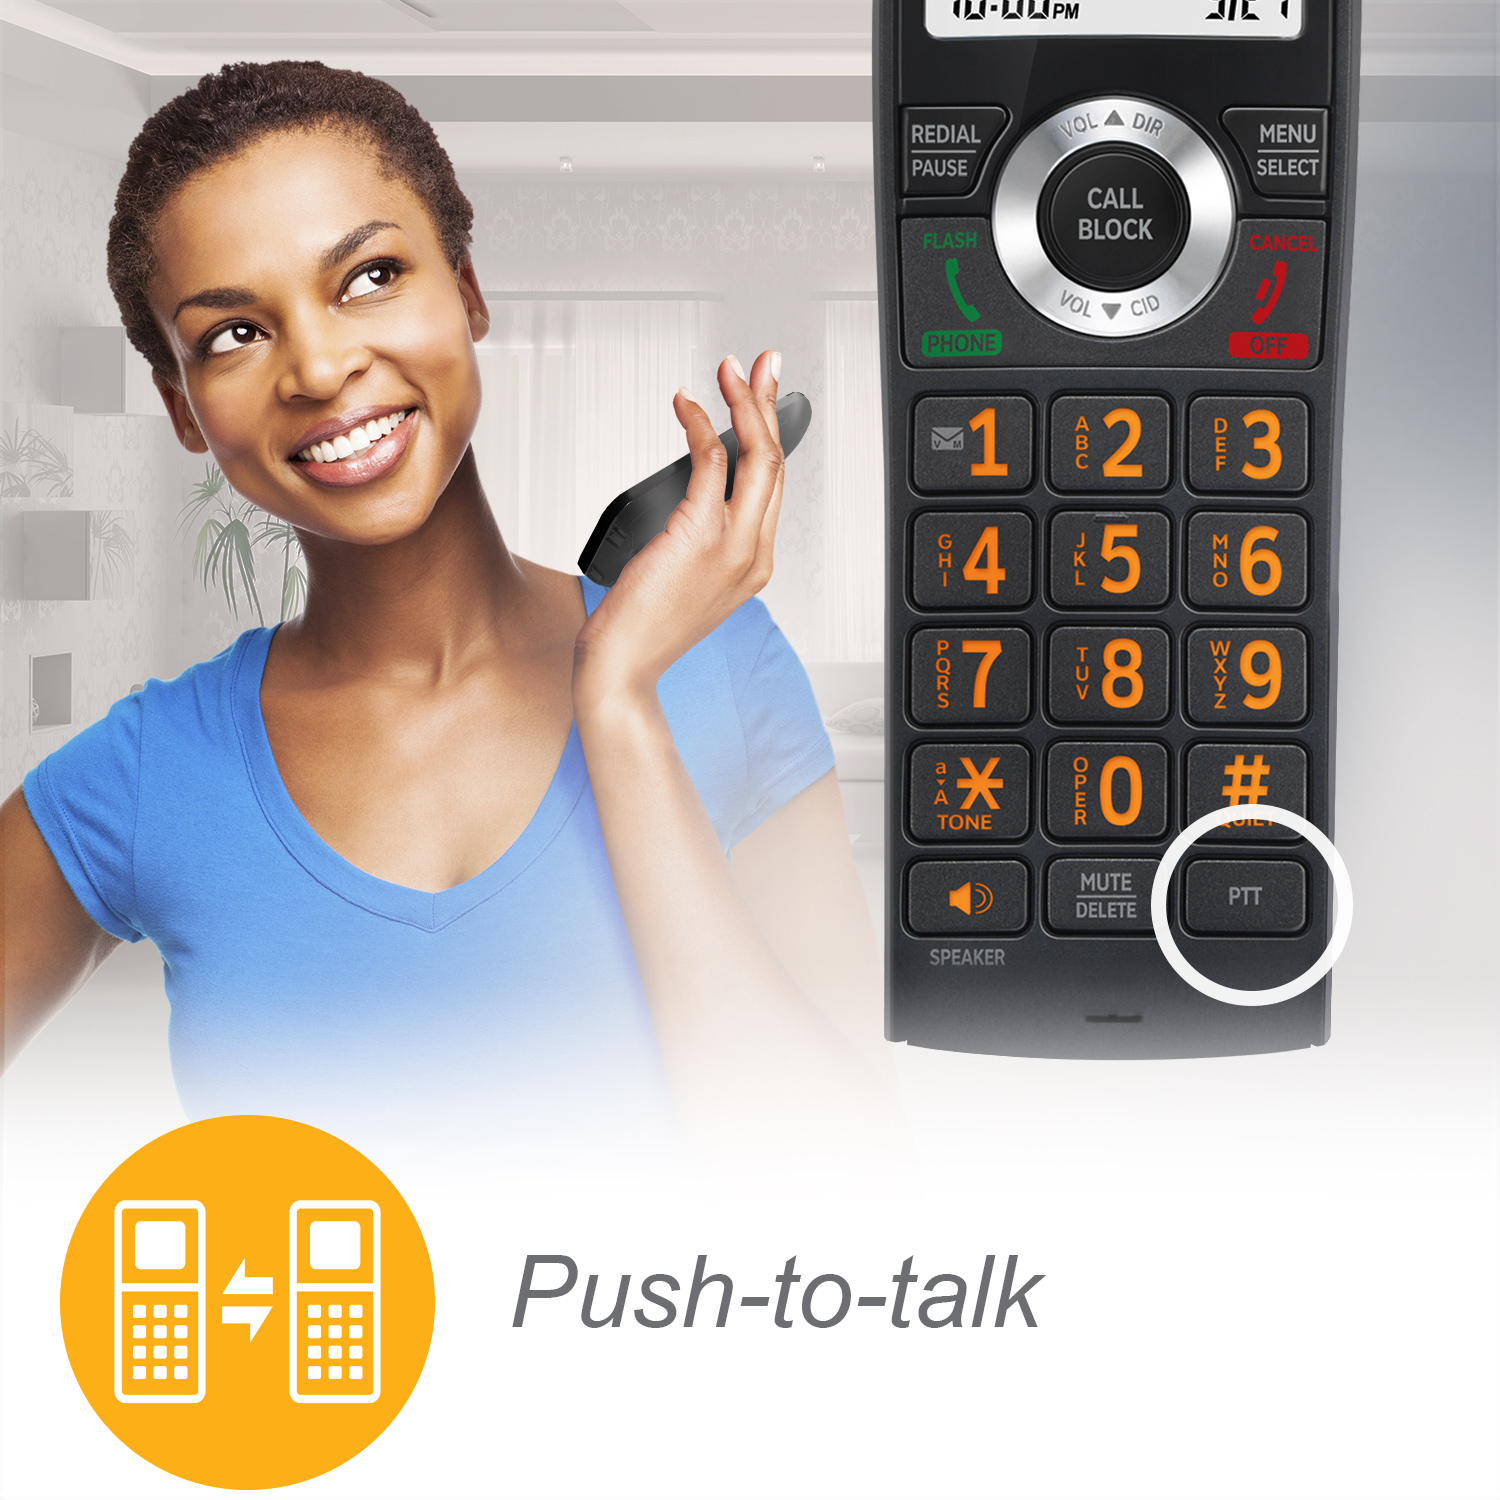 3-Handset Expandable Cordless Phone with Unsurpassed Range, Smart Call Blocker and Answering System - view 8